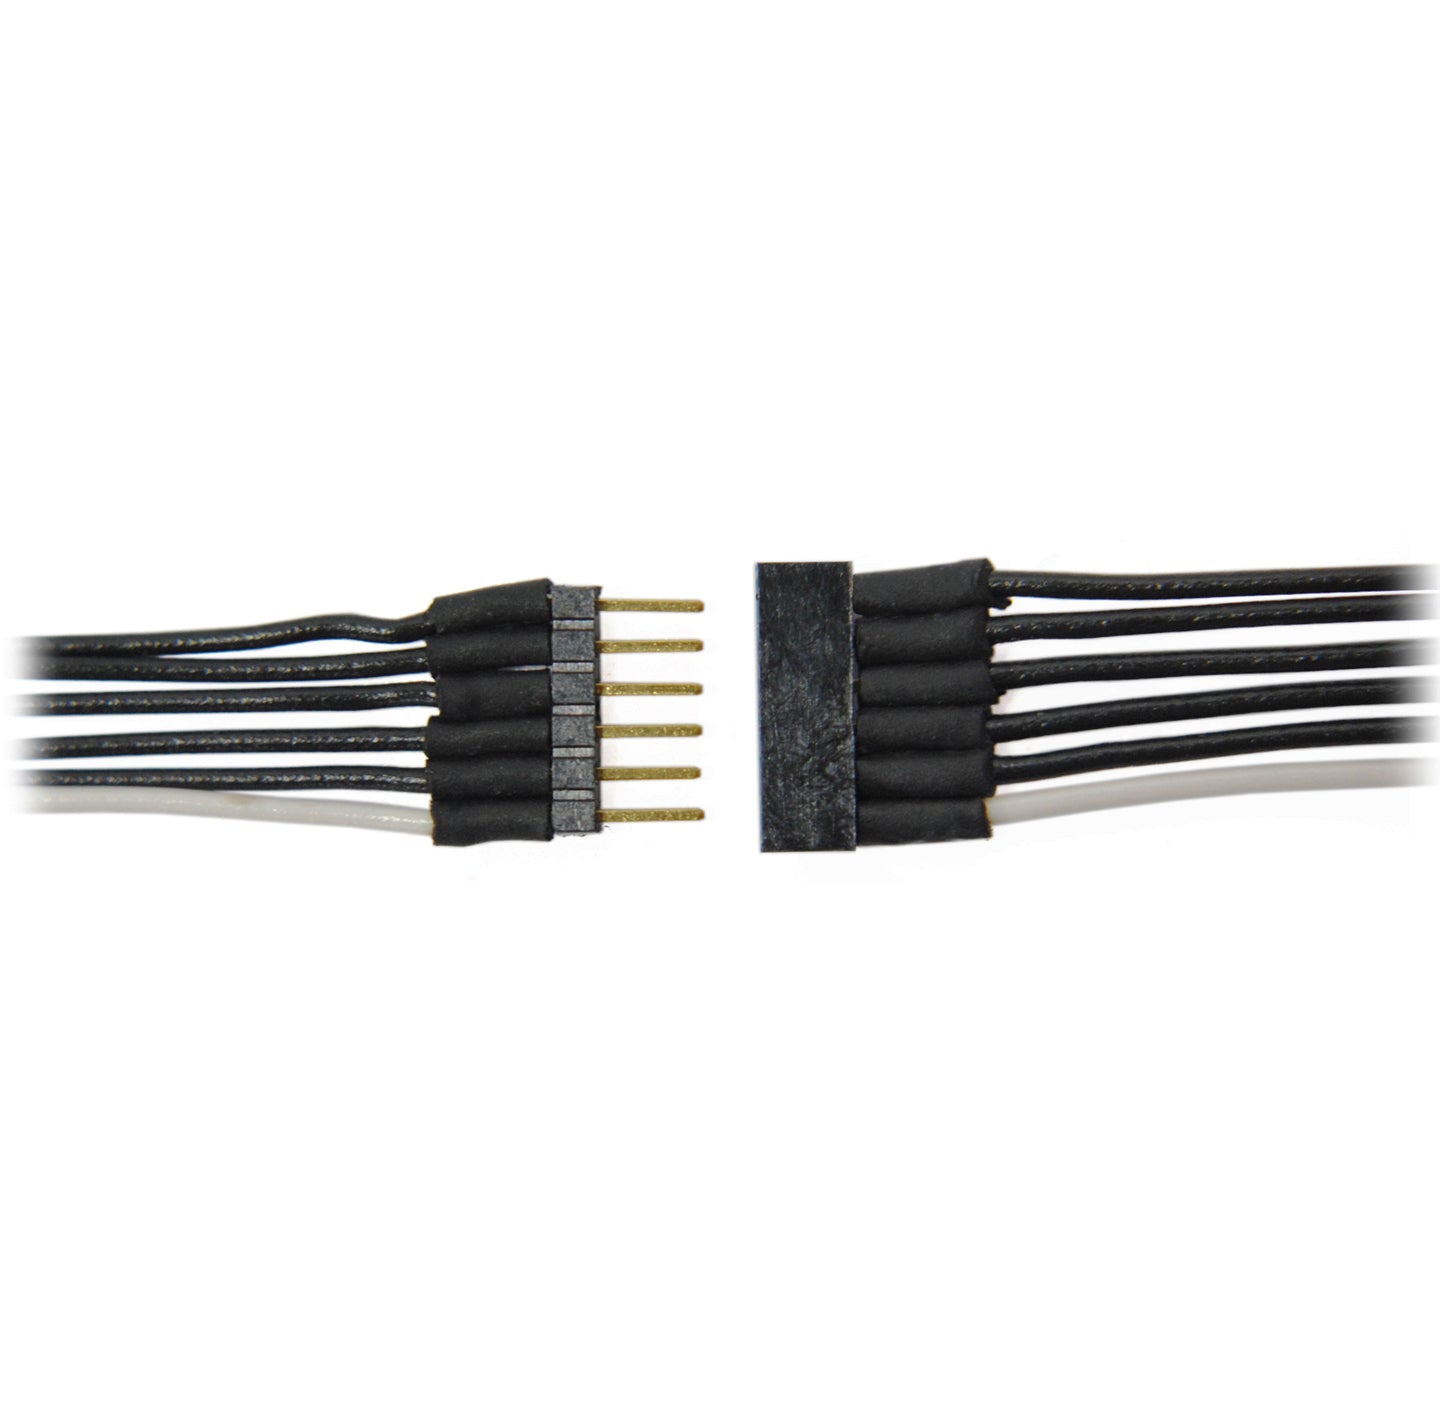 Train Control Systems 1476 6-Pin Micro Connector (Black and White Wires)